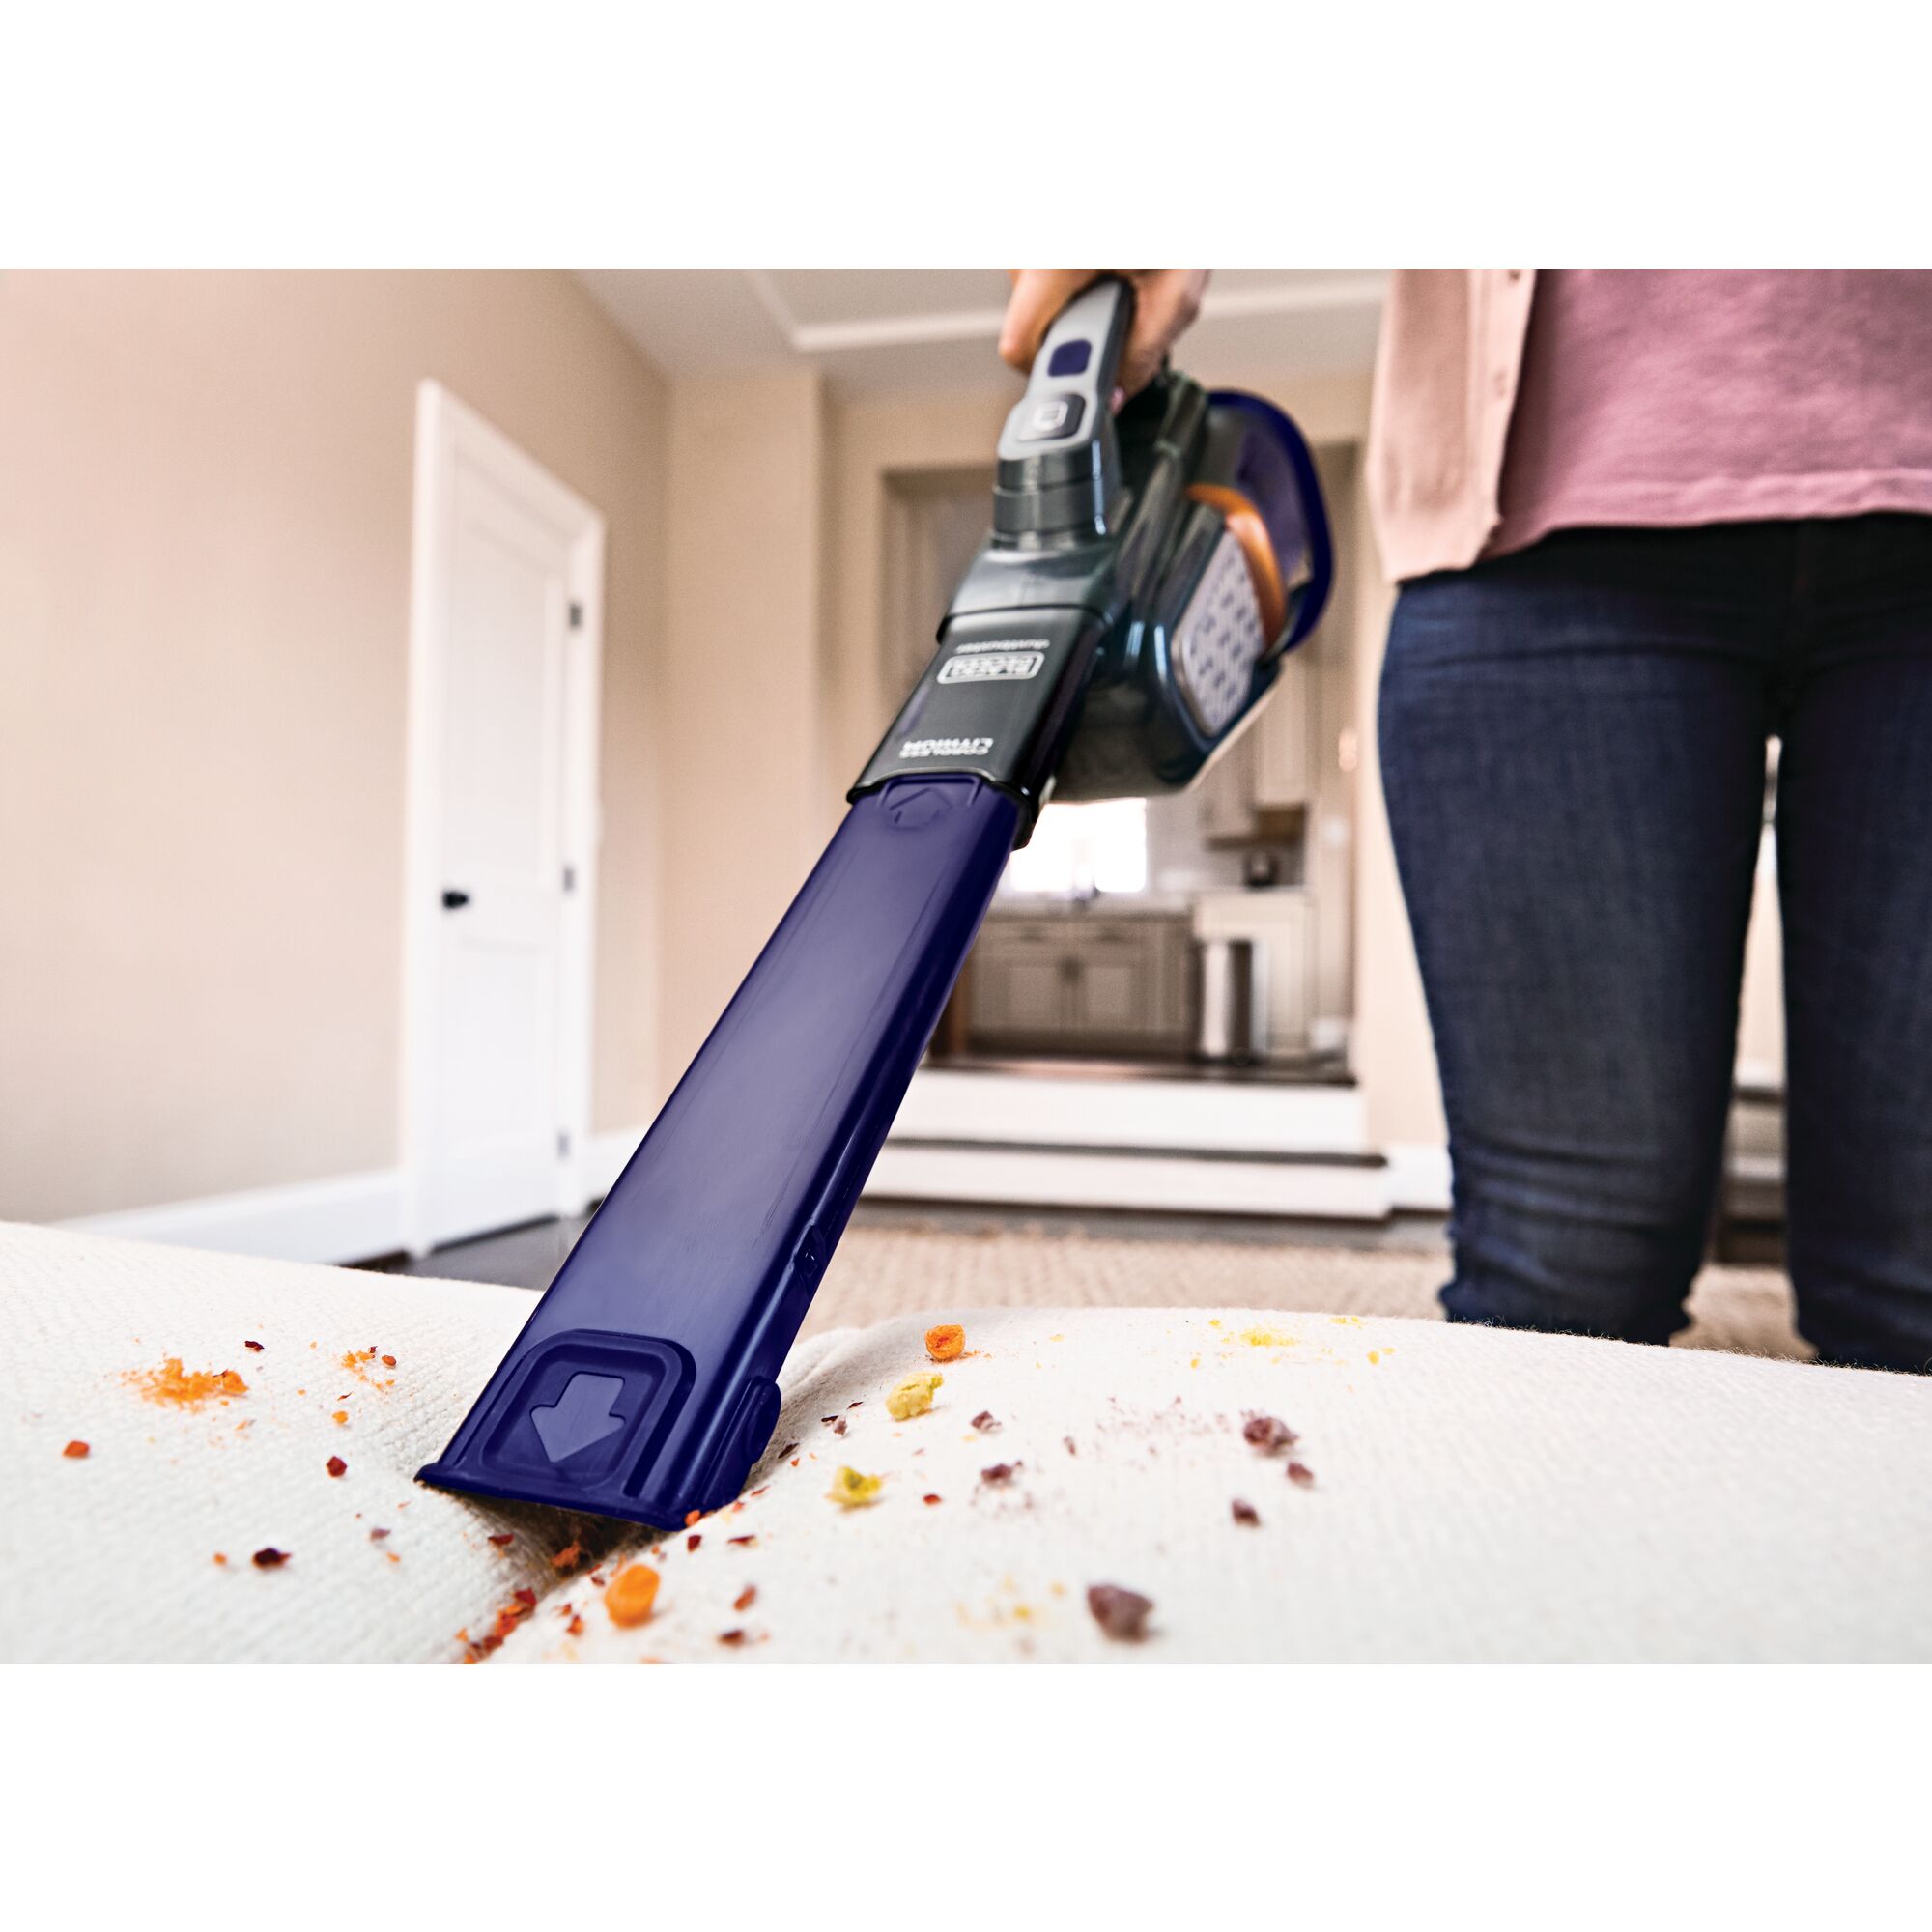 Dustbuster Advanced Clean Pet Cordless Hand Vacuum being used to clean dirt on a sofa.